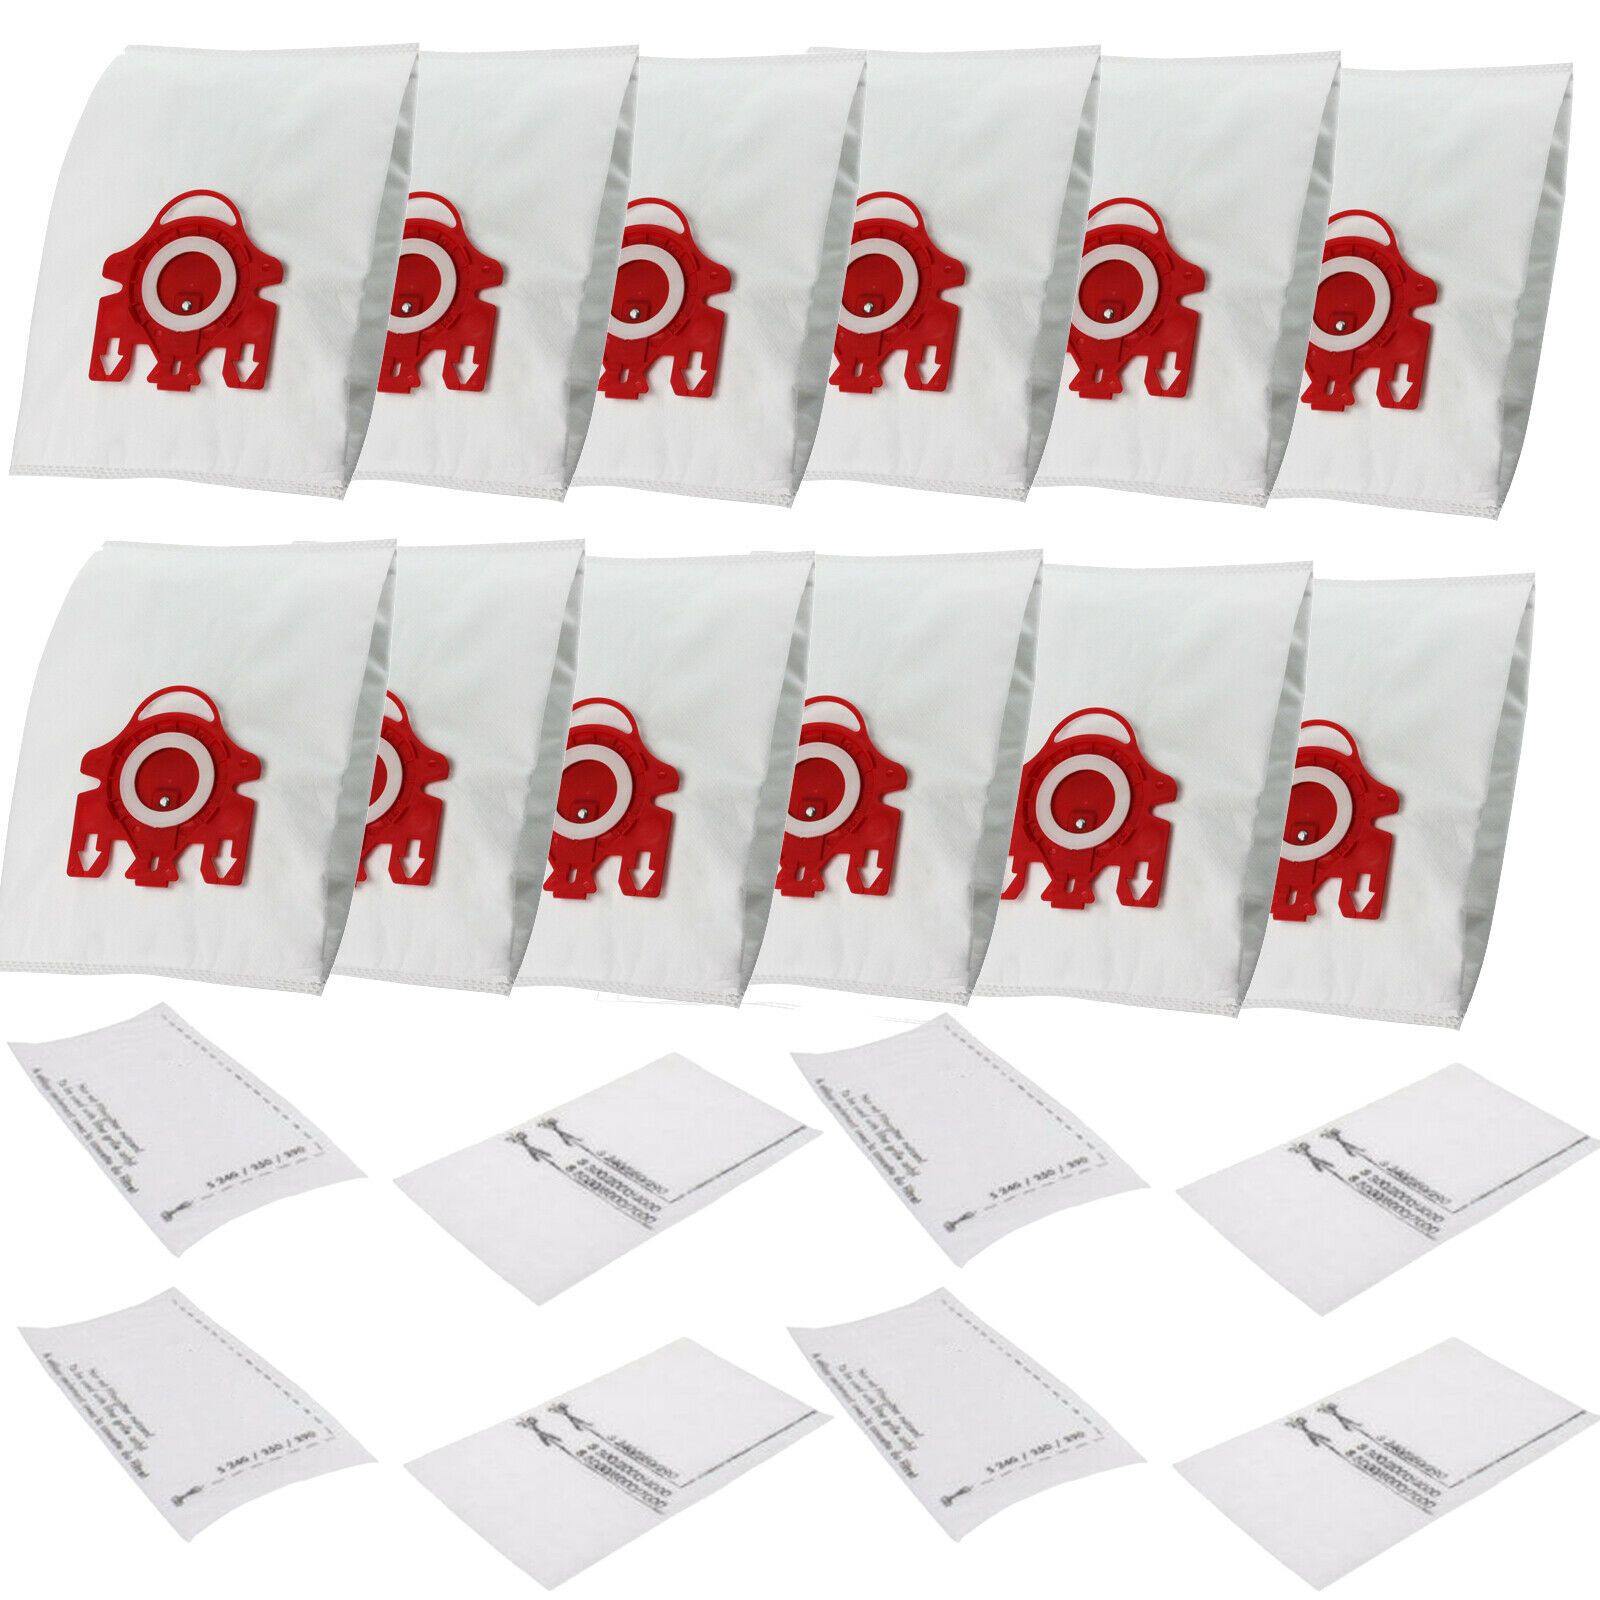 12 Synthetic Bags & 8 Filters For Miele S344 S381 S381i S386 S4210 Comfort Sparesbarn